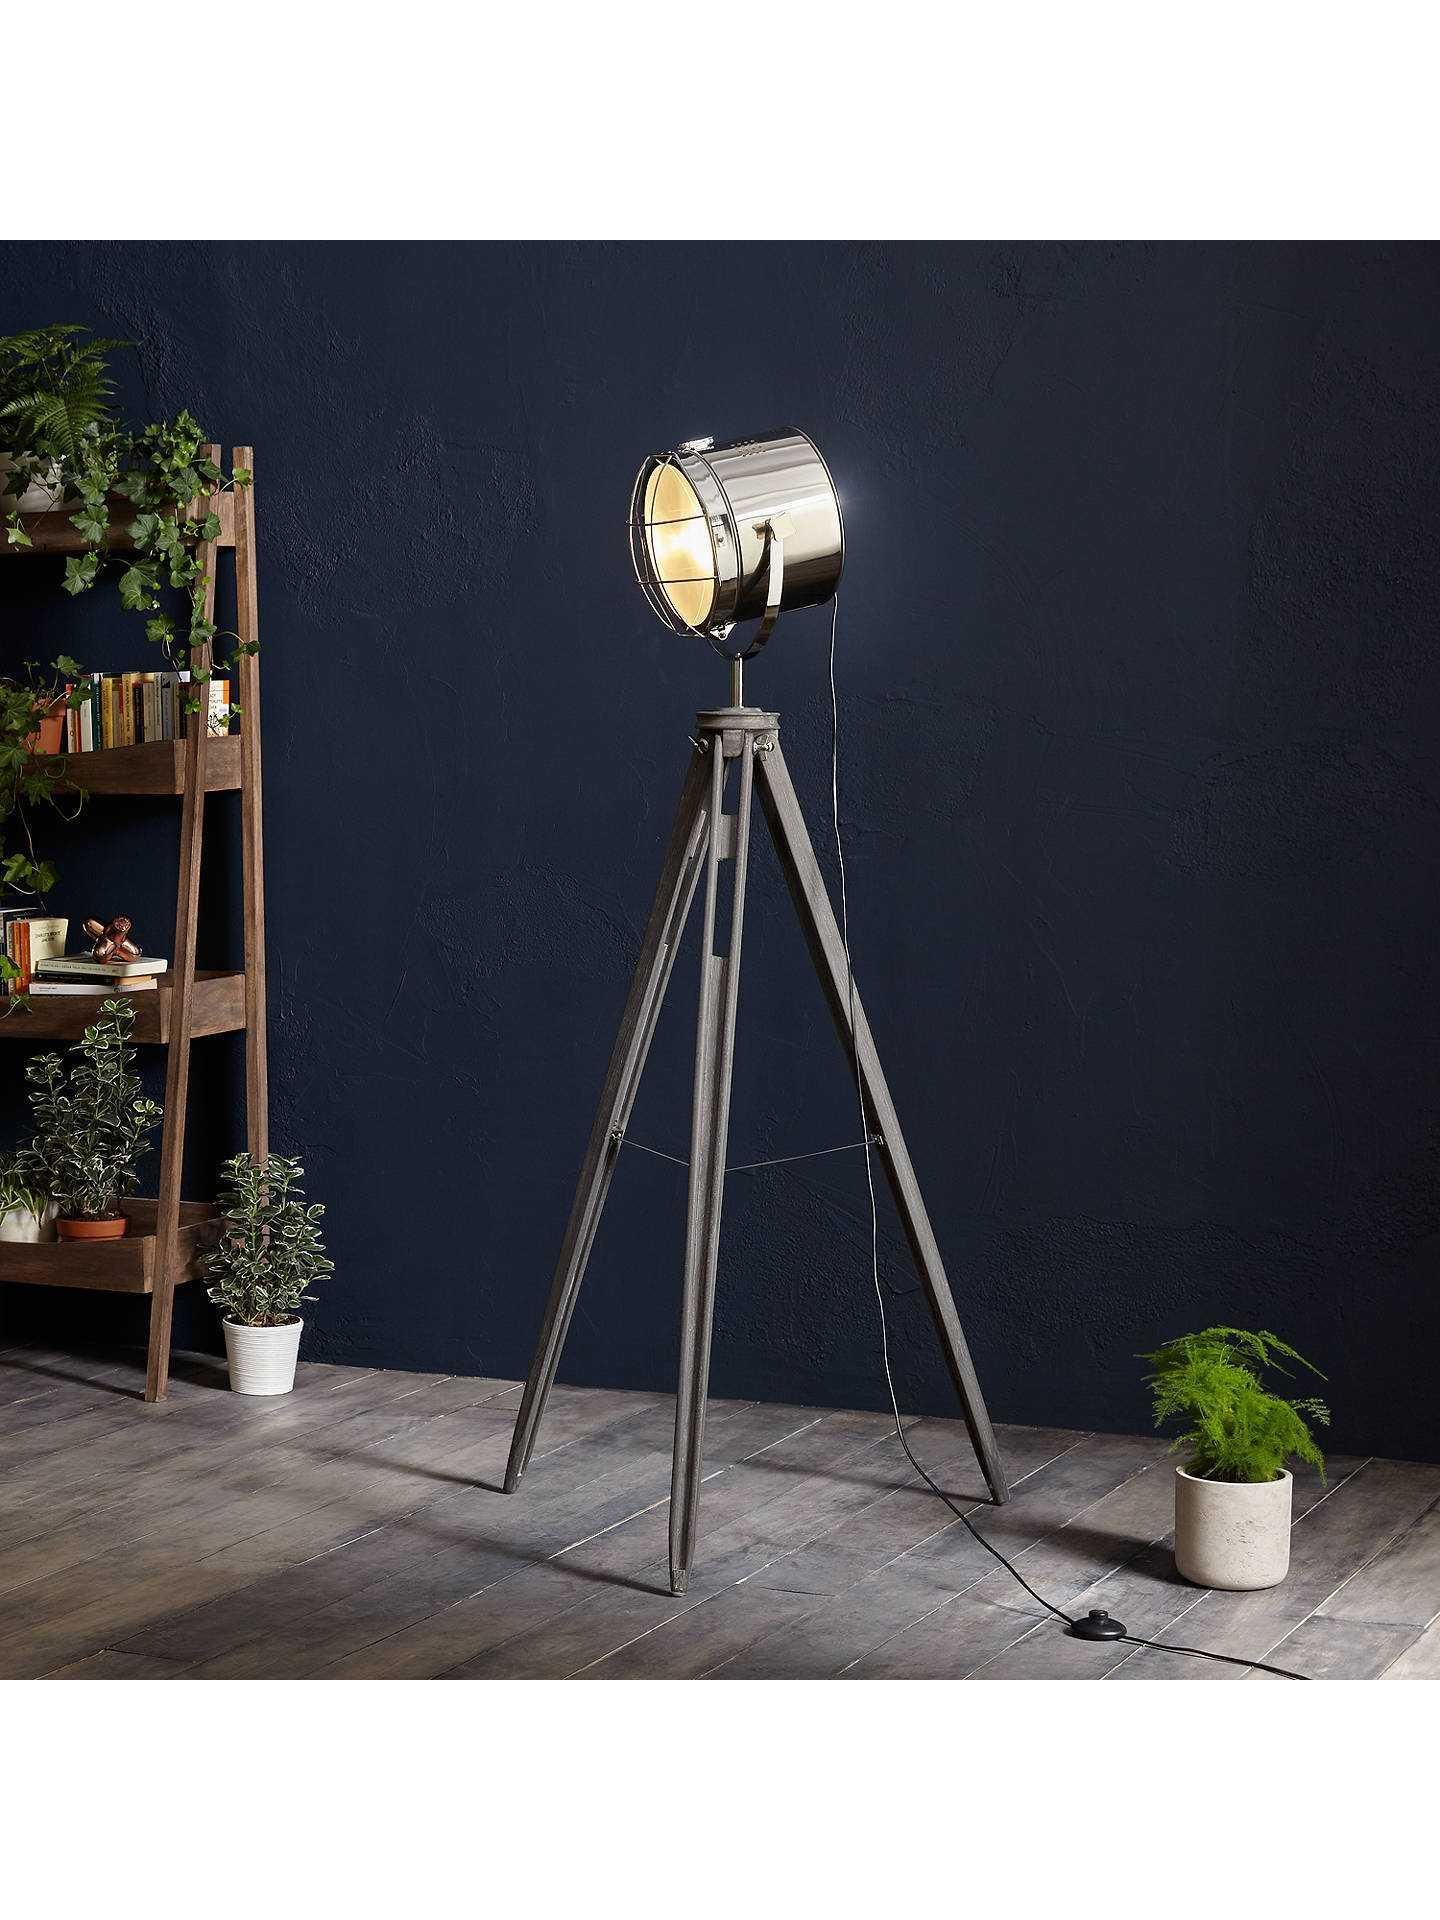 Rrp £195 When Complete Boxed John Lewis And Partners Jules Washed Grey Finish Floor Lamp Base Only - Image 2 of 2